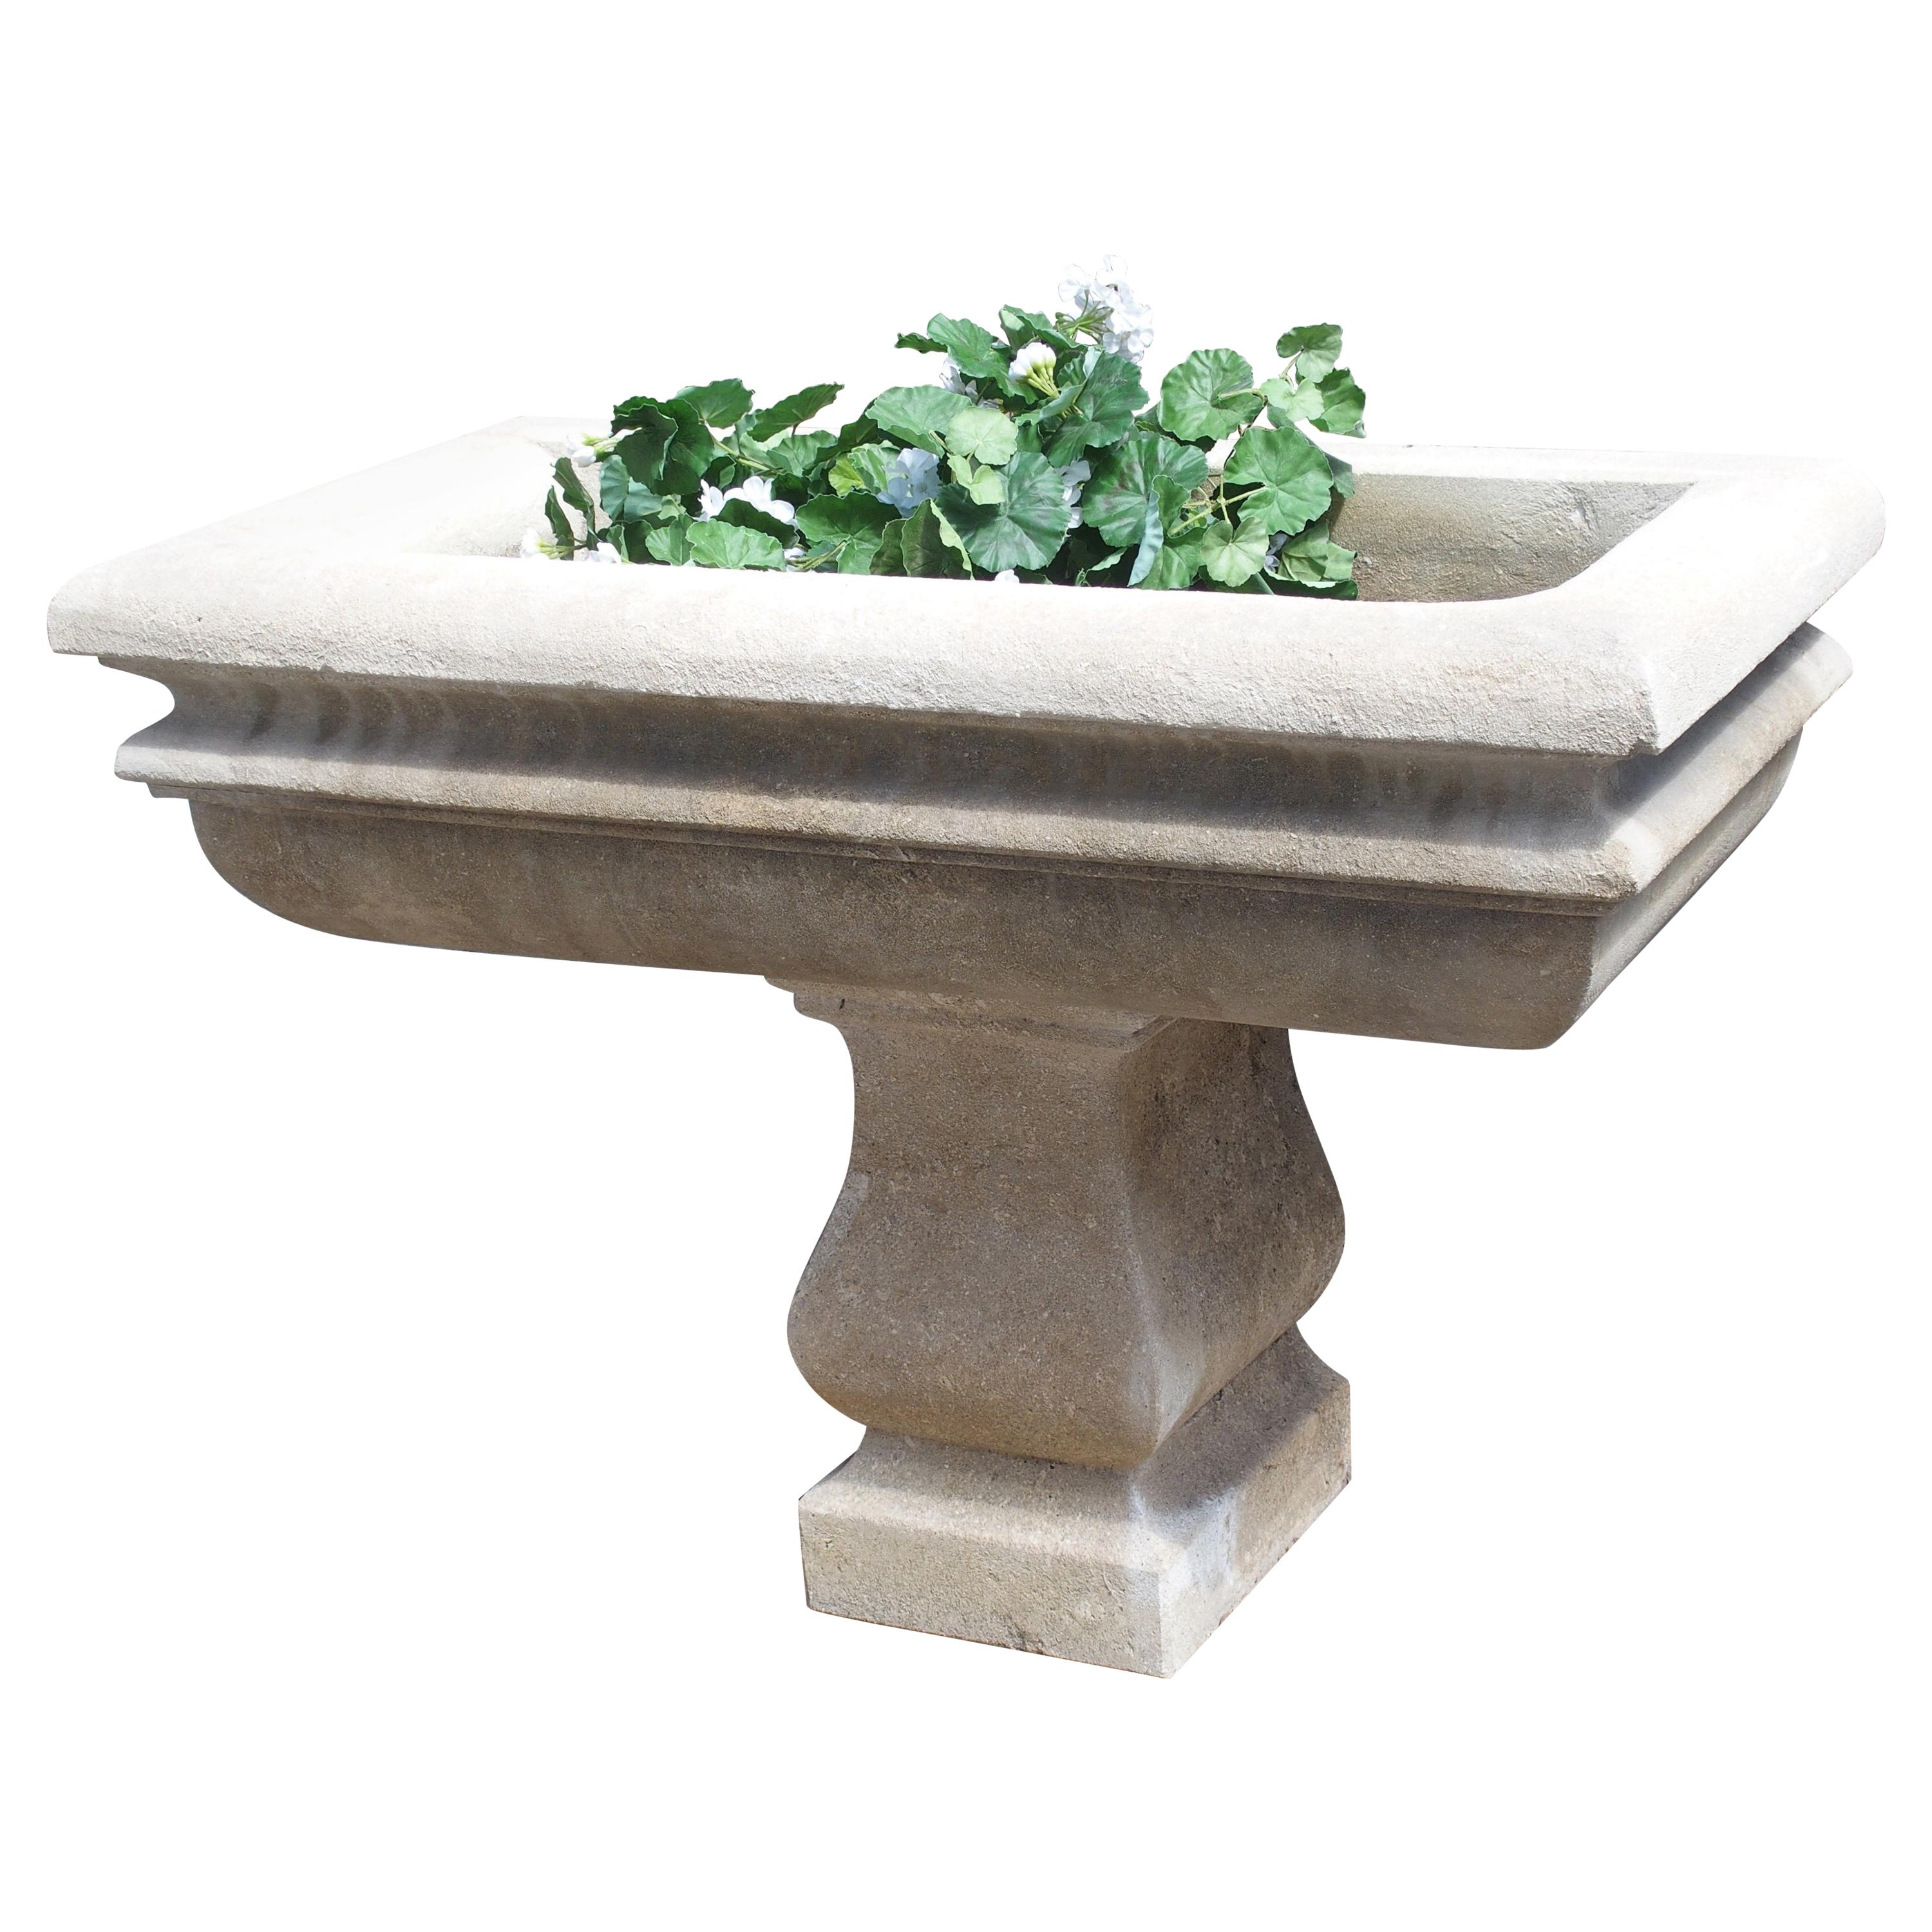 Two Piece Italian Garden Planter or Sink in Carved Limestone For Sale